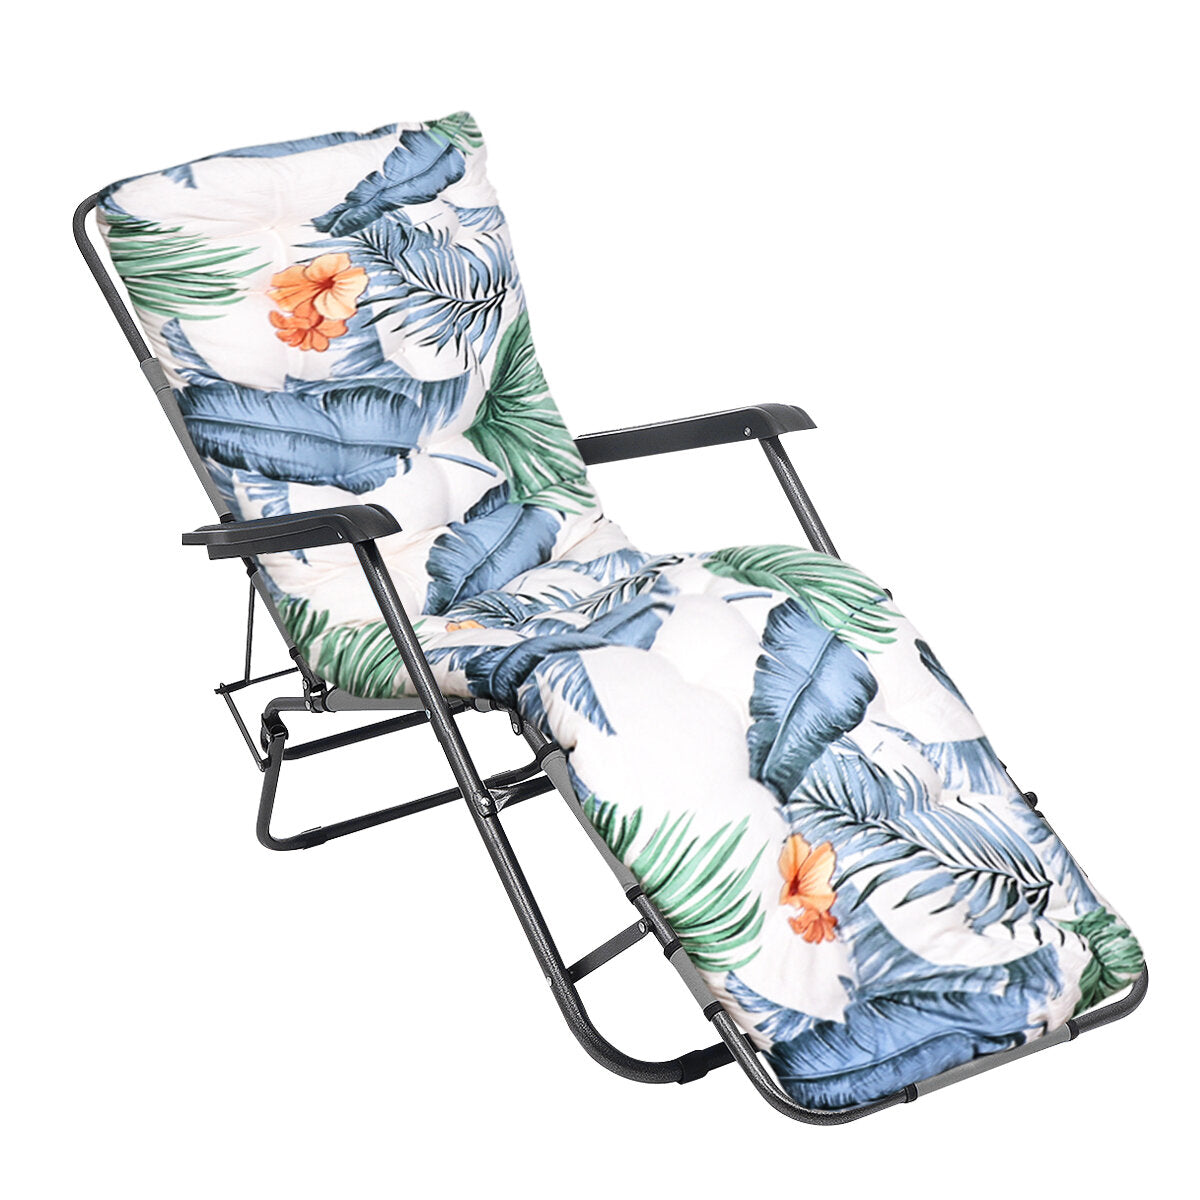 Lounge Chair Cushion Tufted Soft Deck Chaise Padding Outdoor Patio Pool Recliner